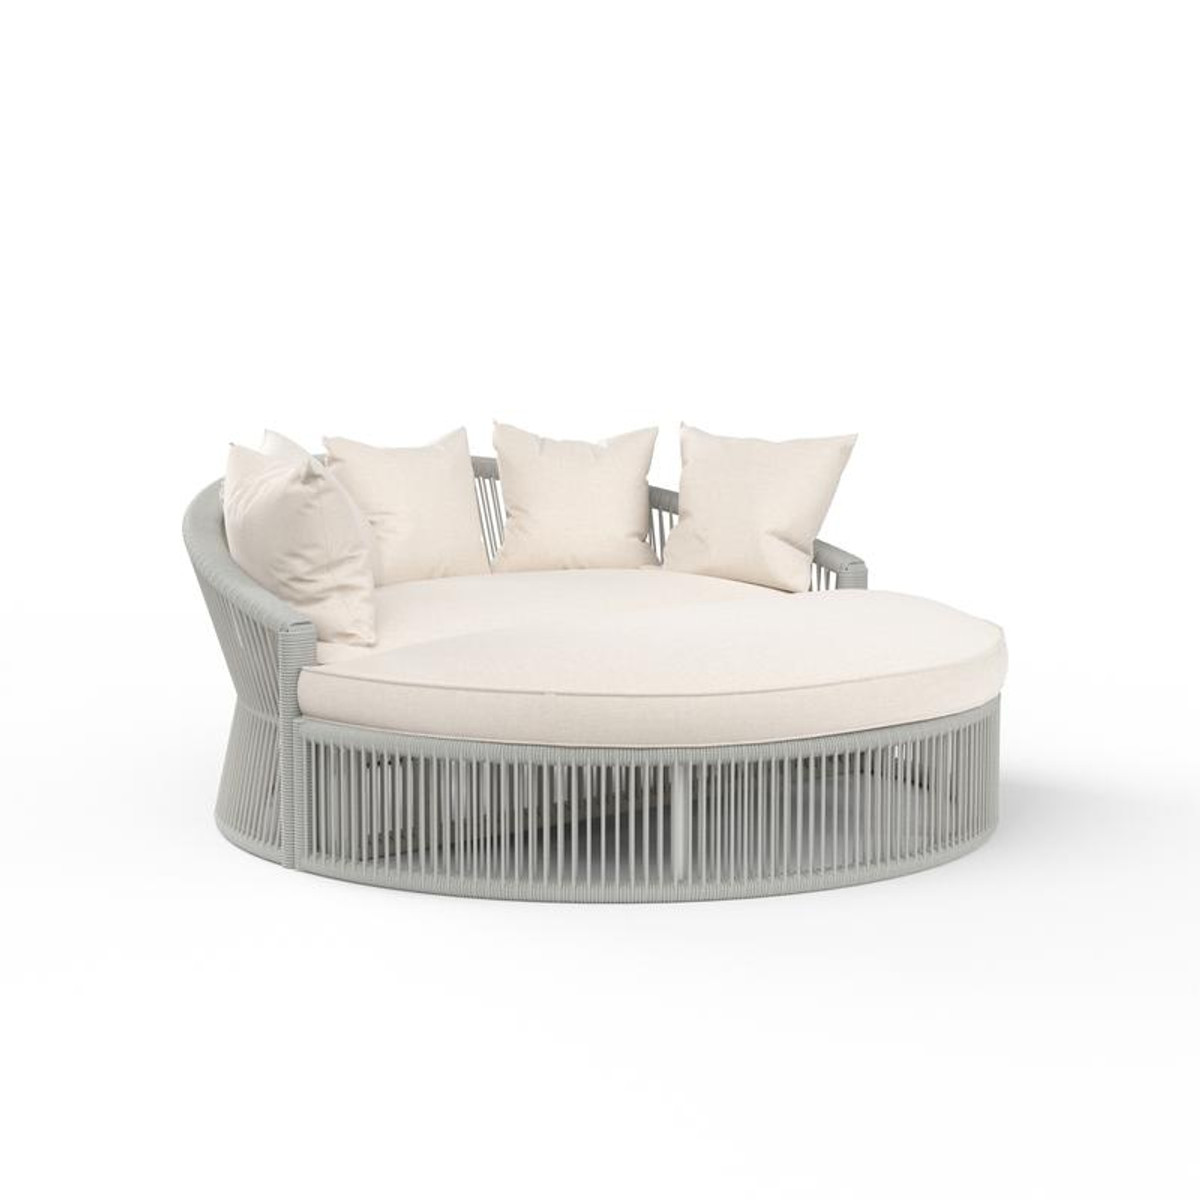 Miami Daybed